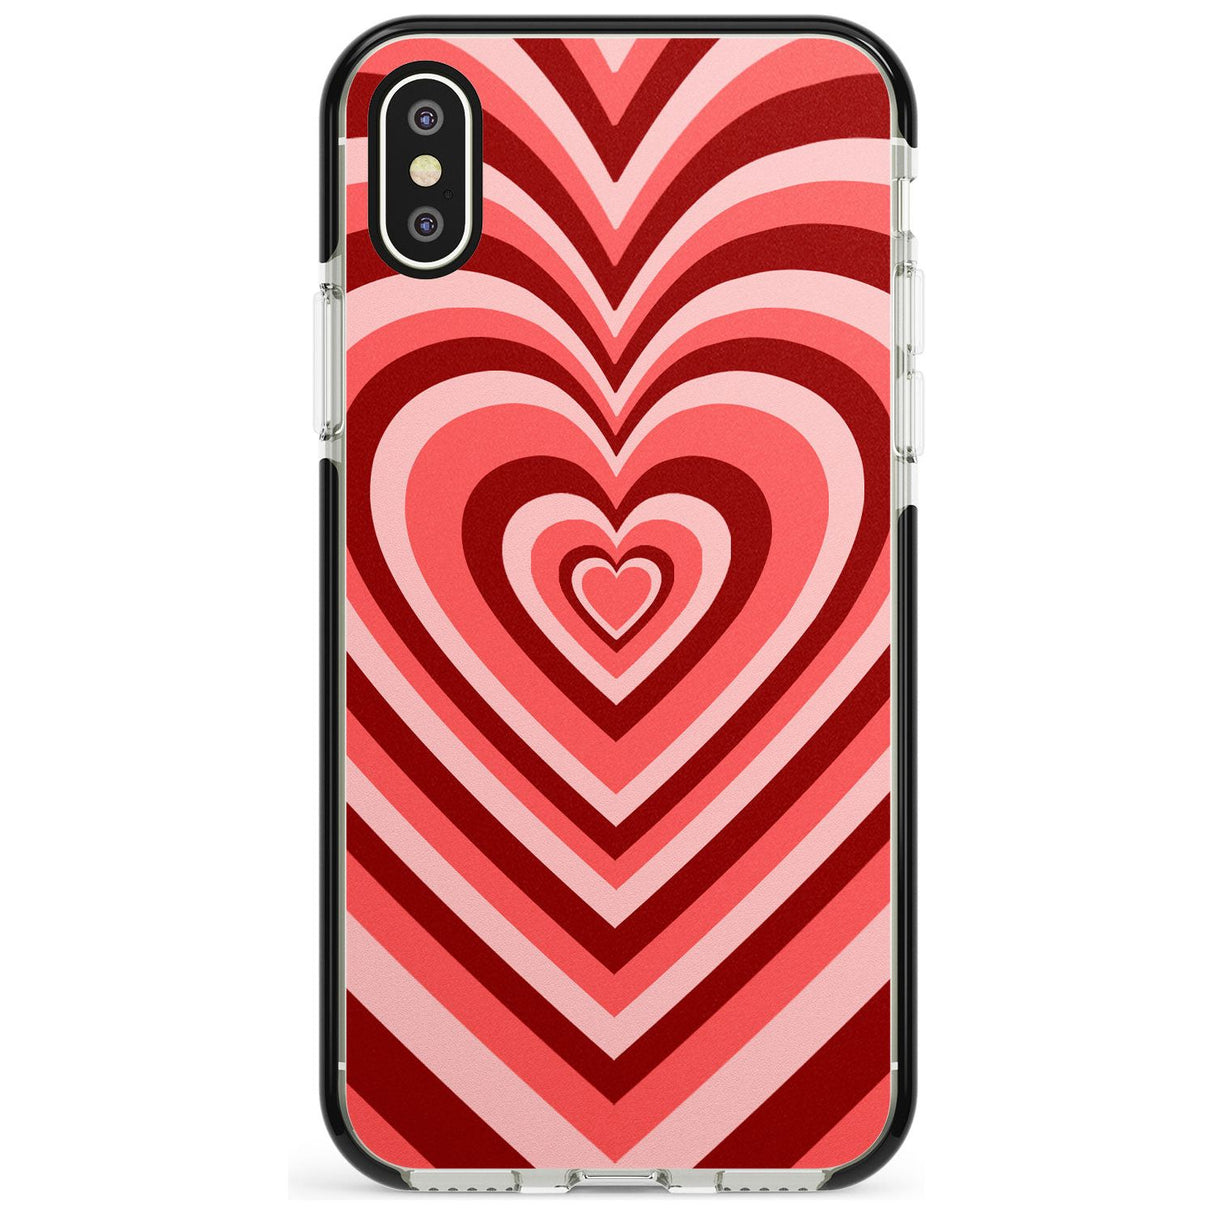 Red Heart Illusion Black Impact Phone Case for iPhone X XS Max XR